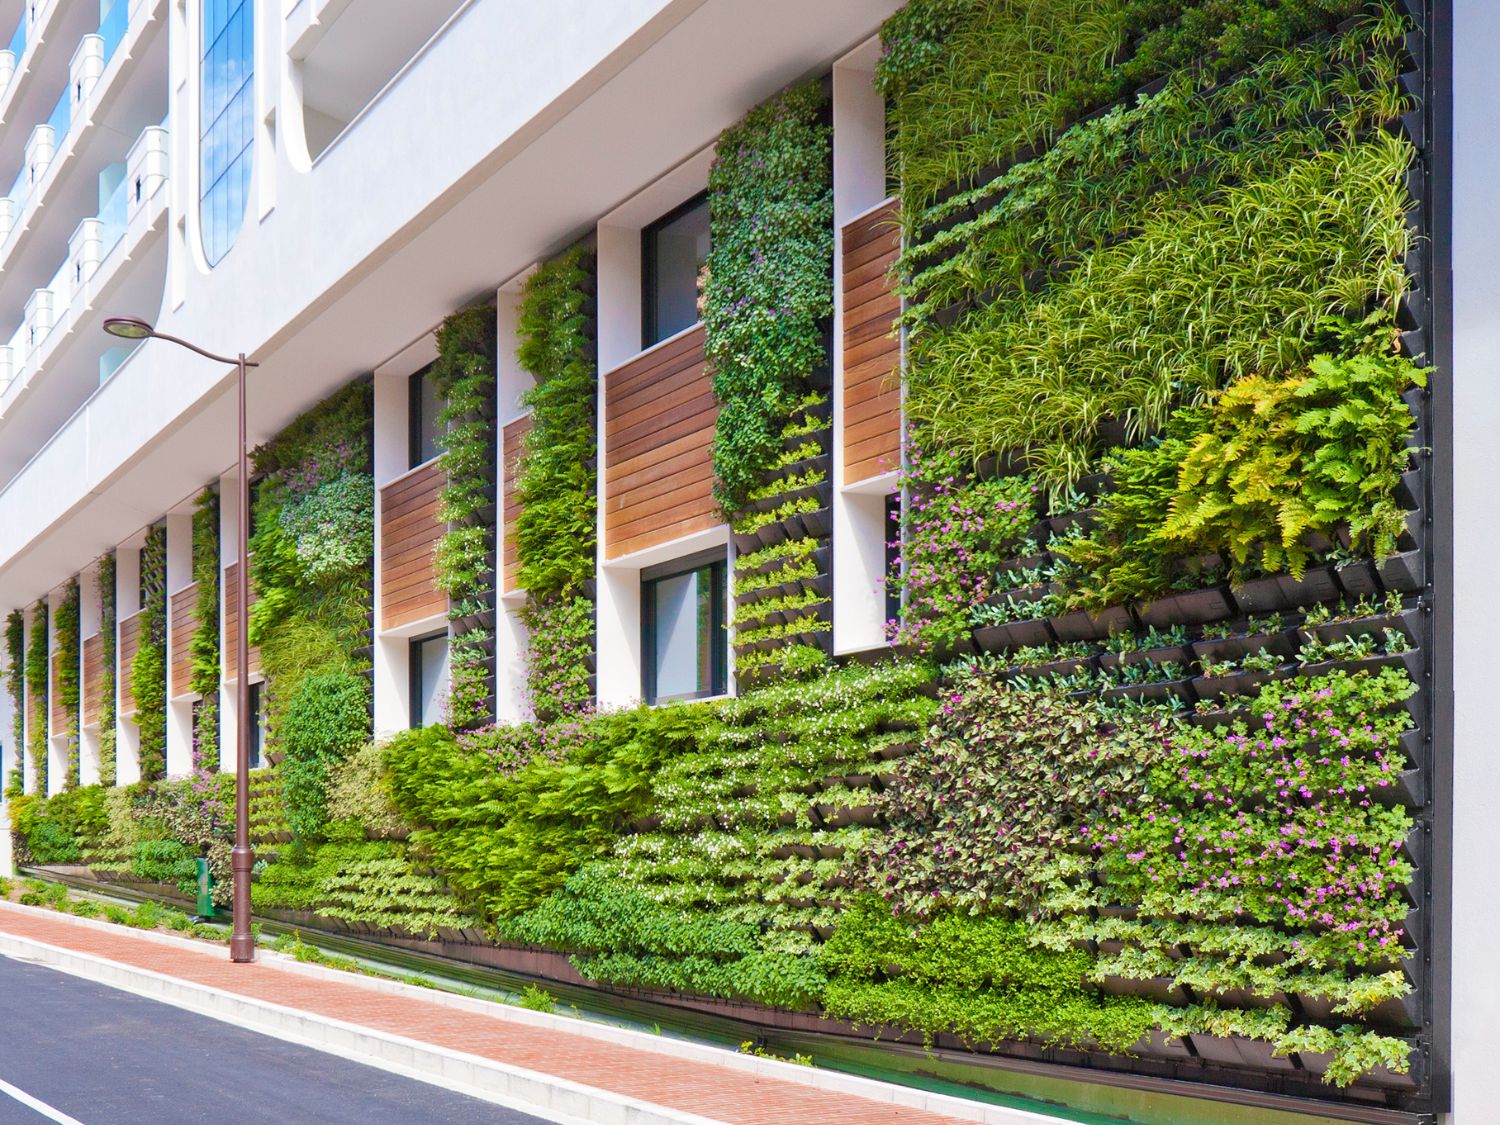 A photo of a large vertical garden growing up a building in an urban location